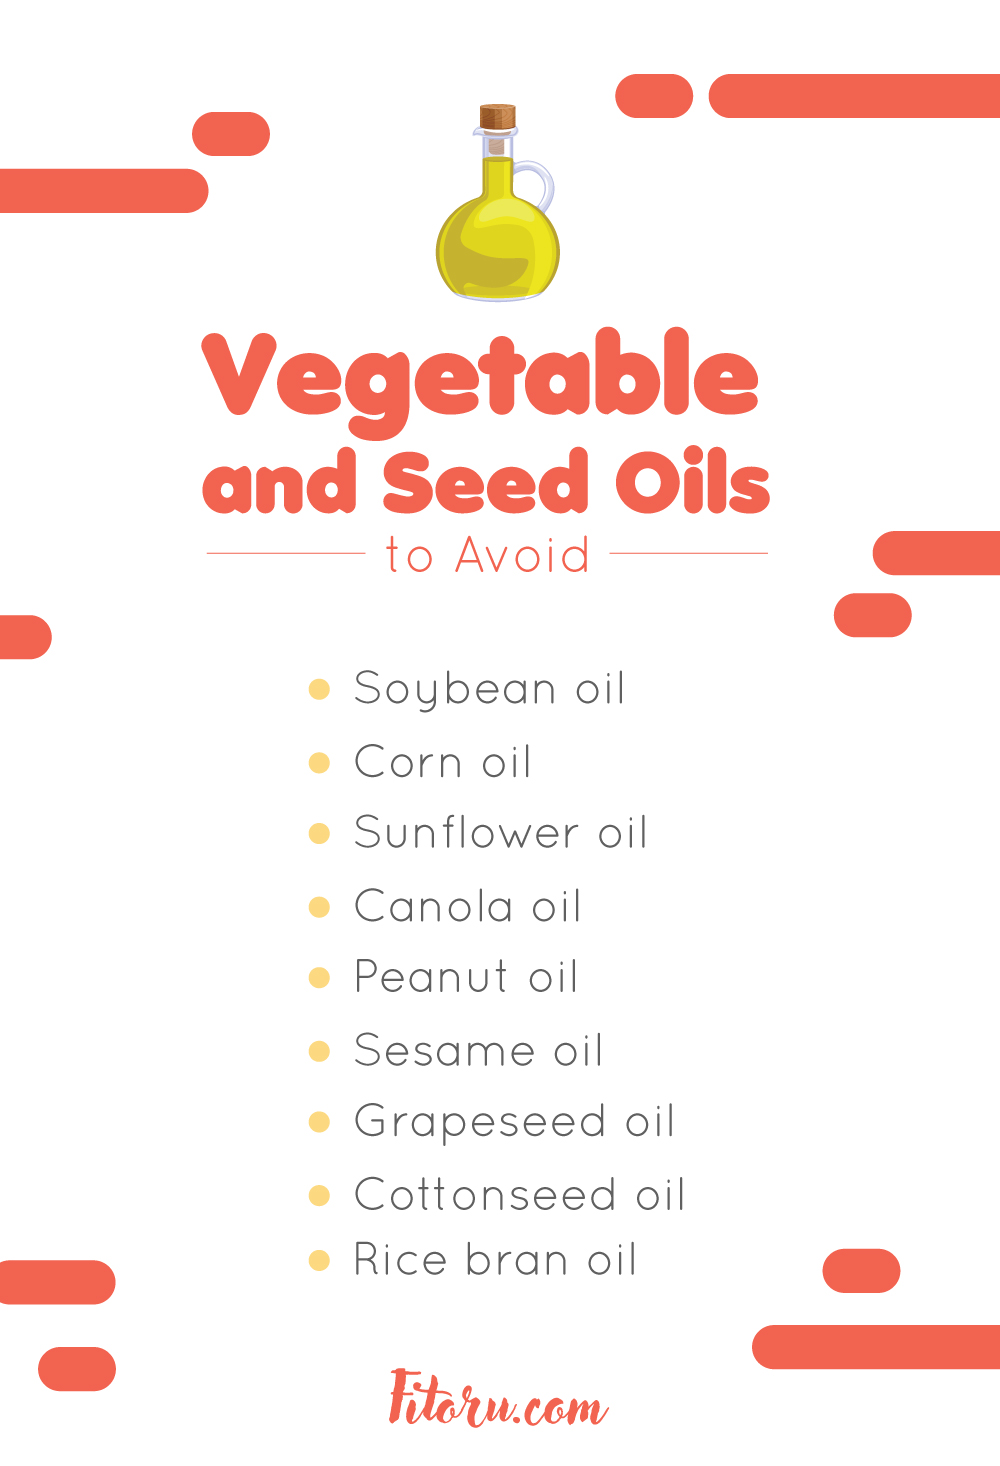 Find healthy substitutes for vegetable oil.